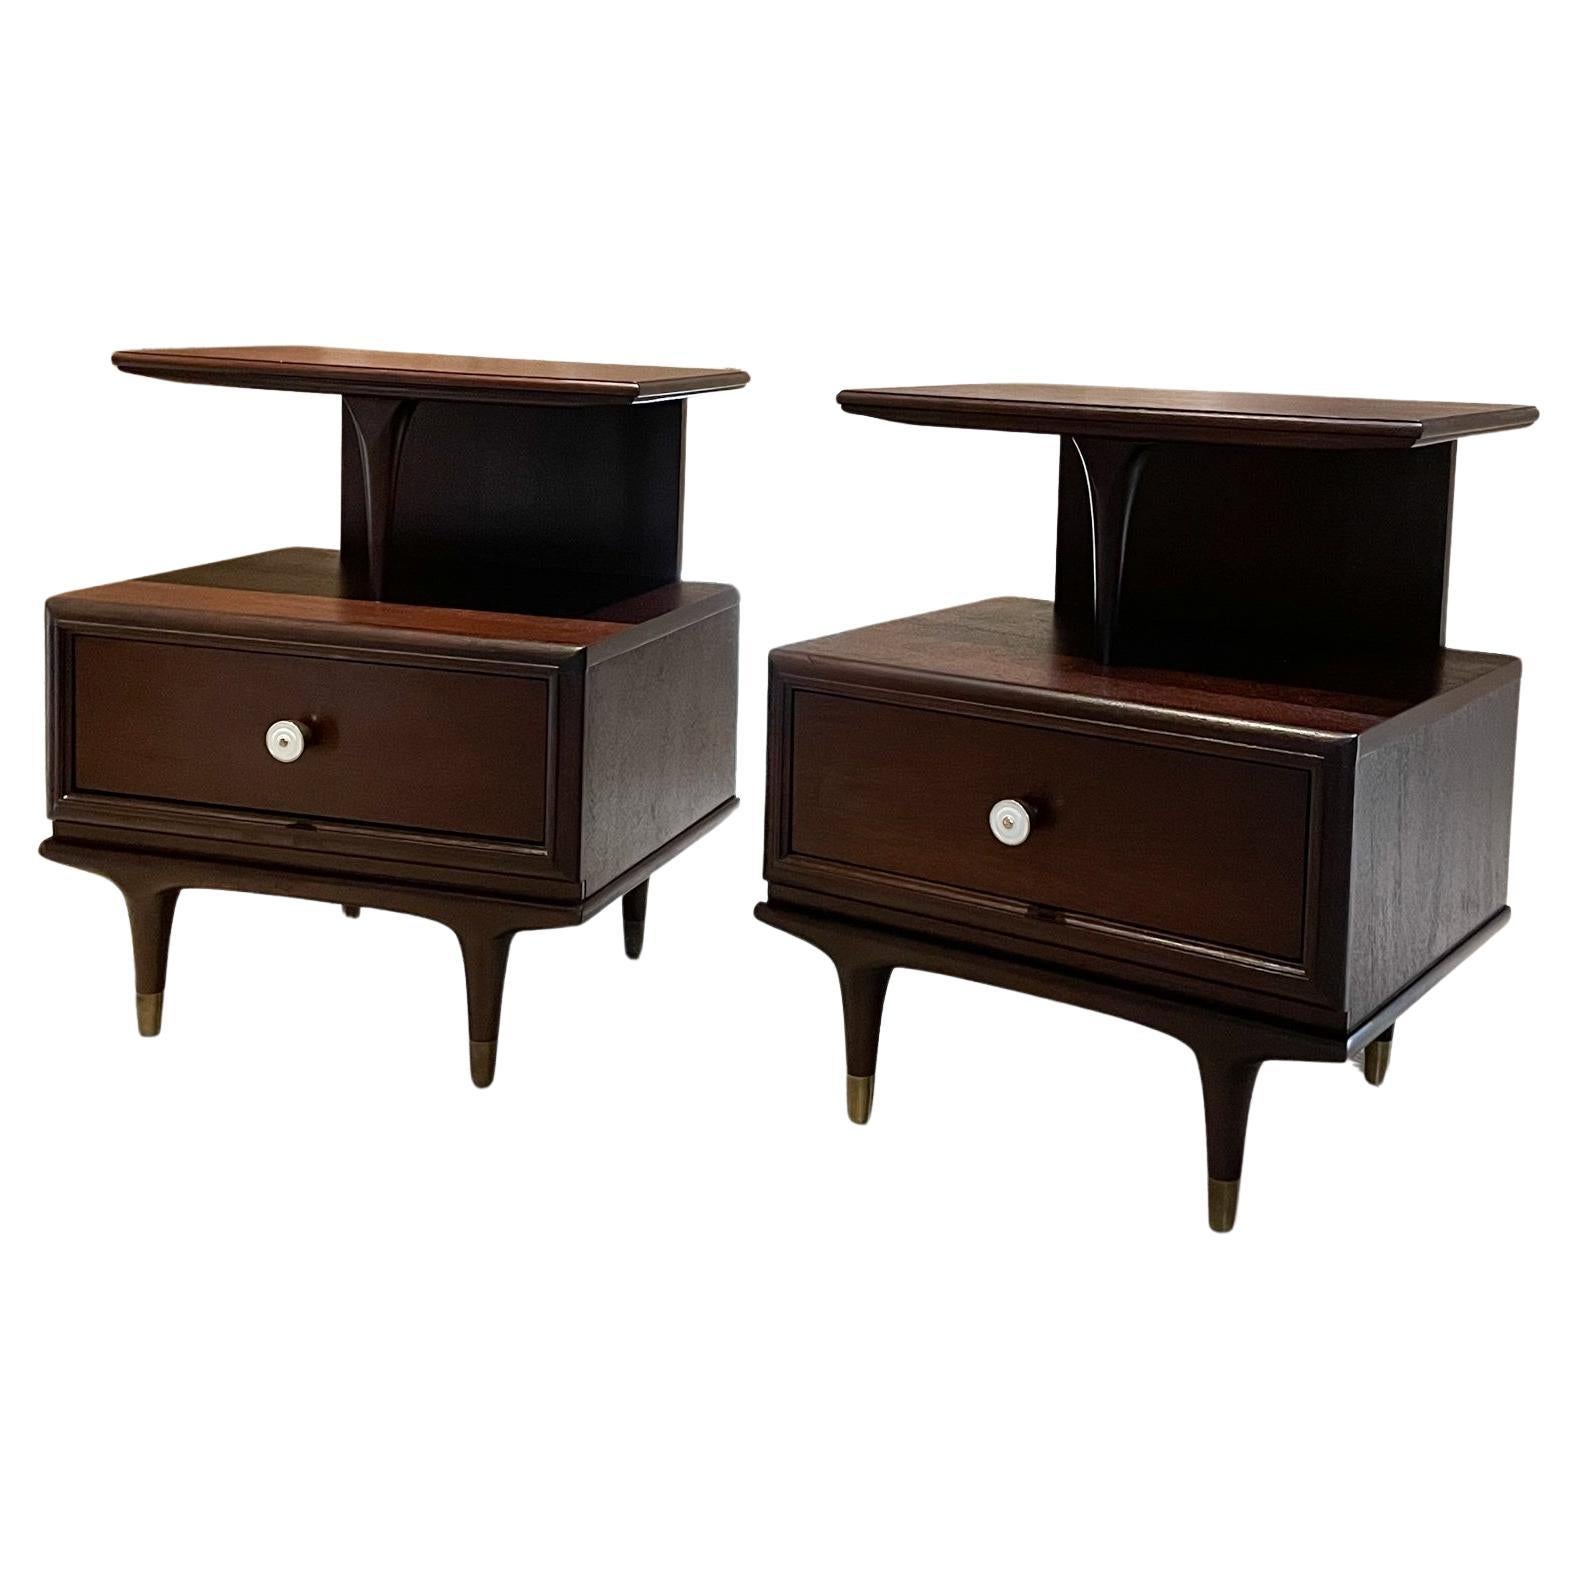 1960s Sensational Mahogany Nightstands Side Tables by Kent Coffey restored